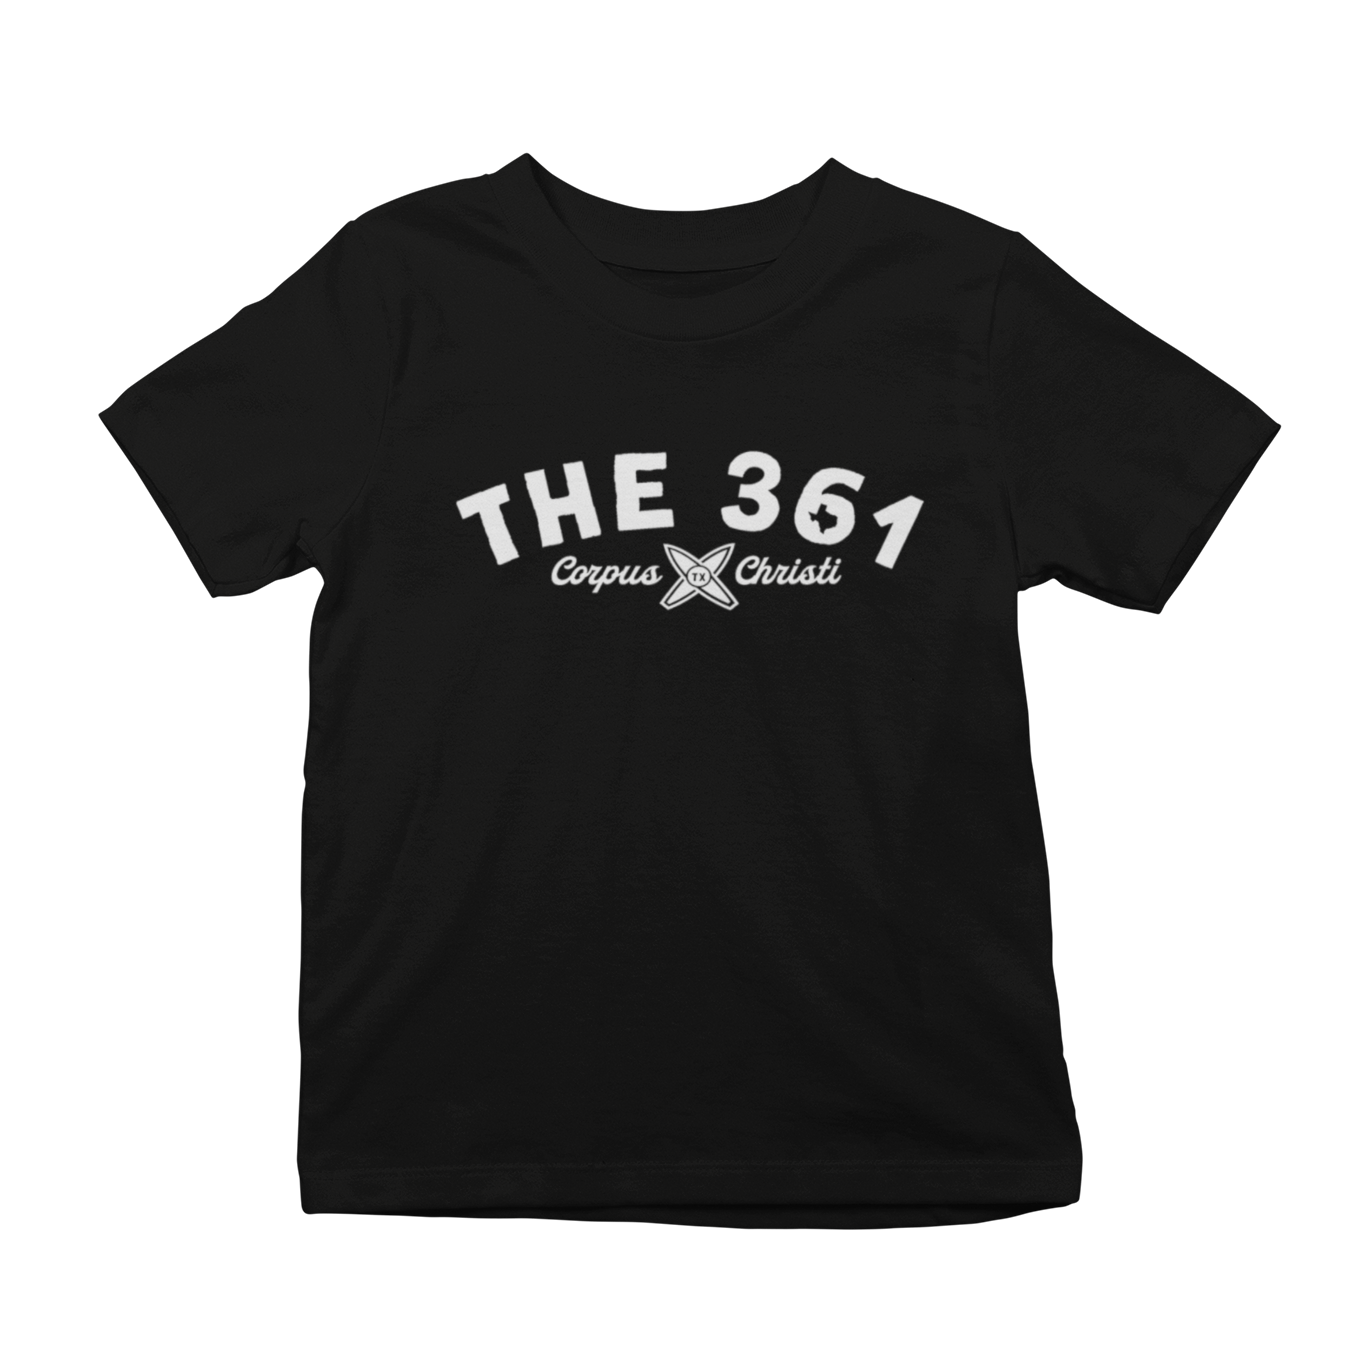 The 361 Youth T-Shirts